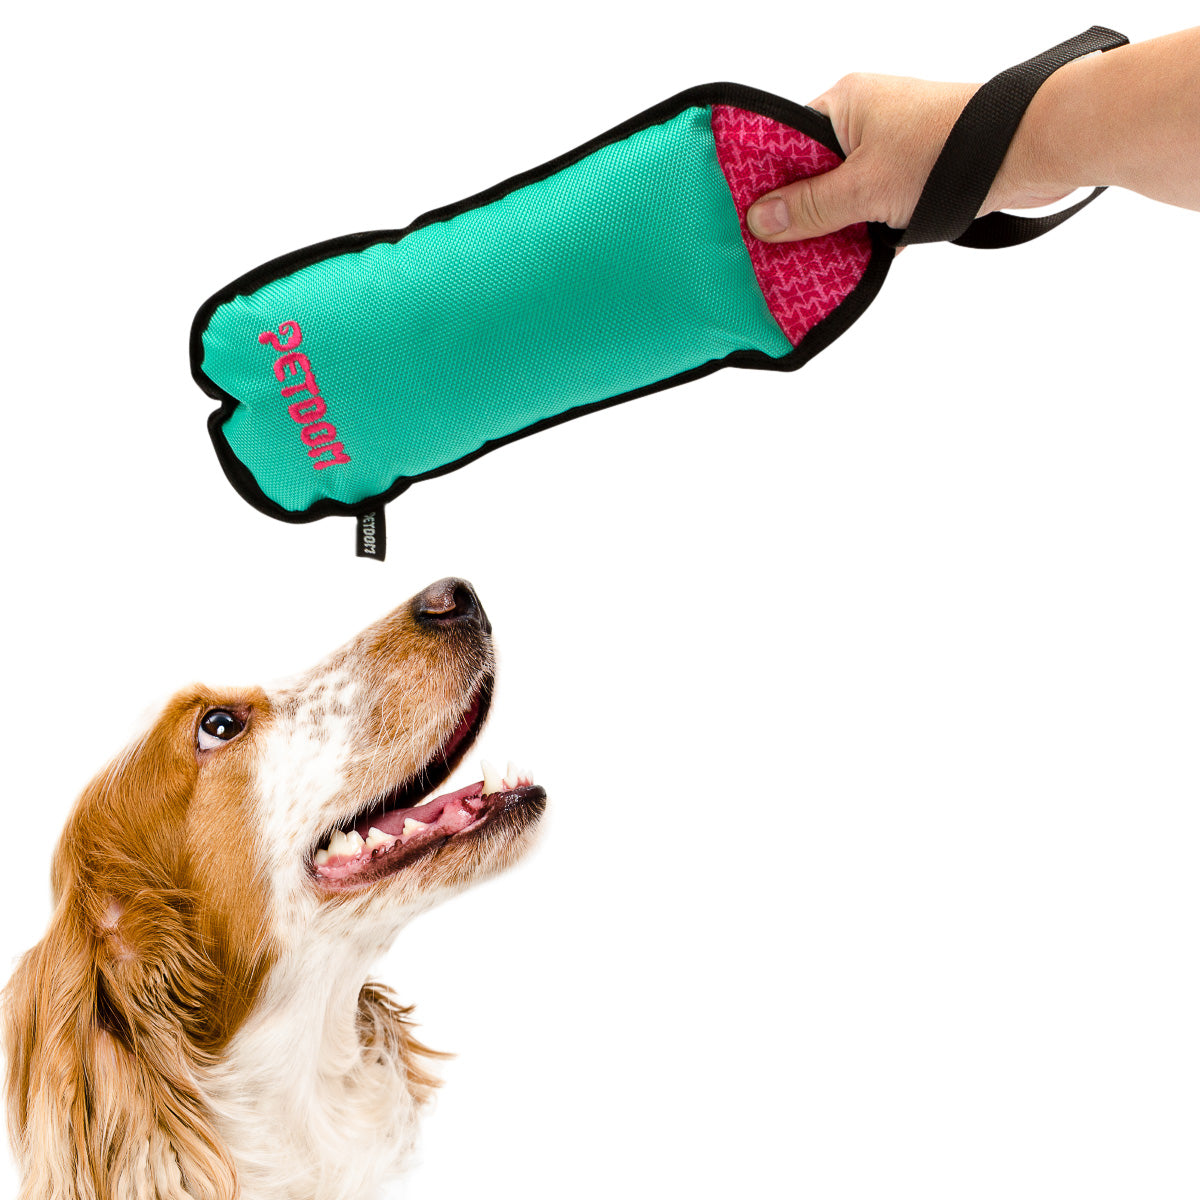 Petdom Chew Toy For Dogs With Squeaker – Toss, Fetch & Tug!